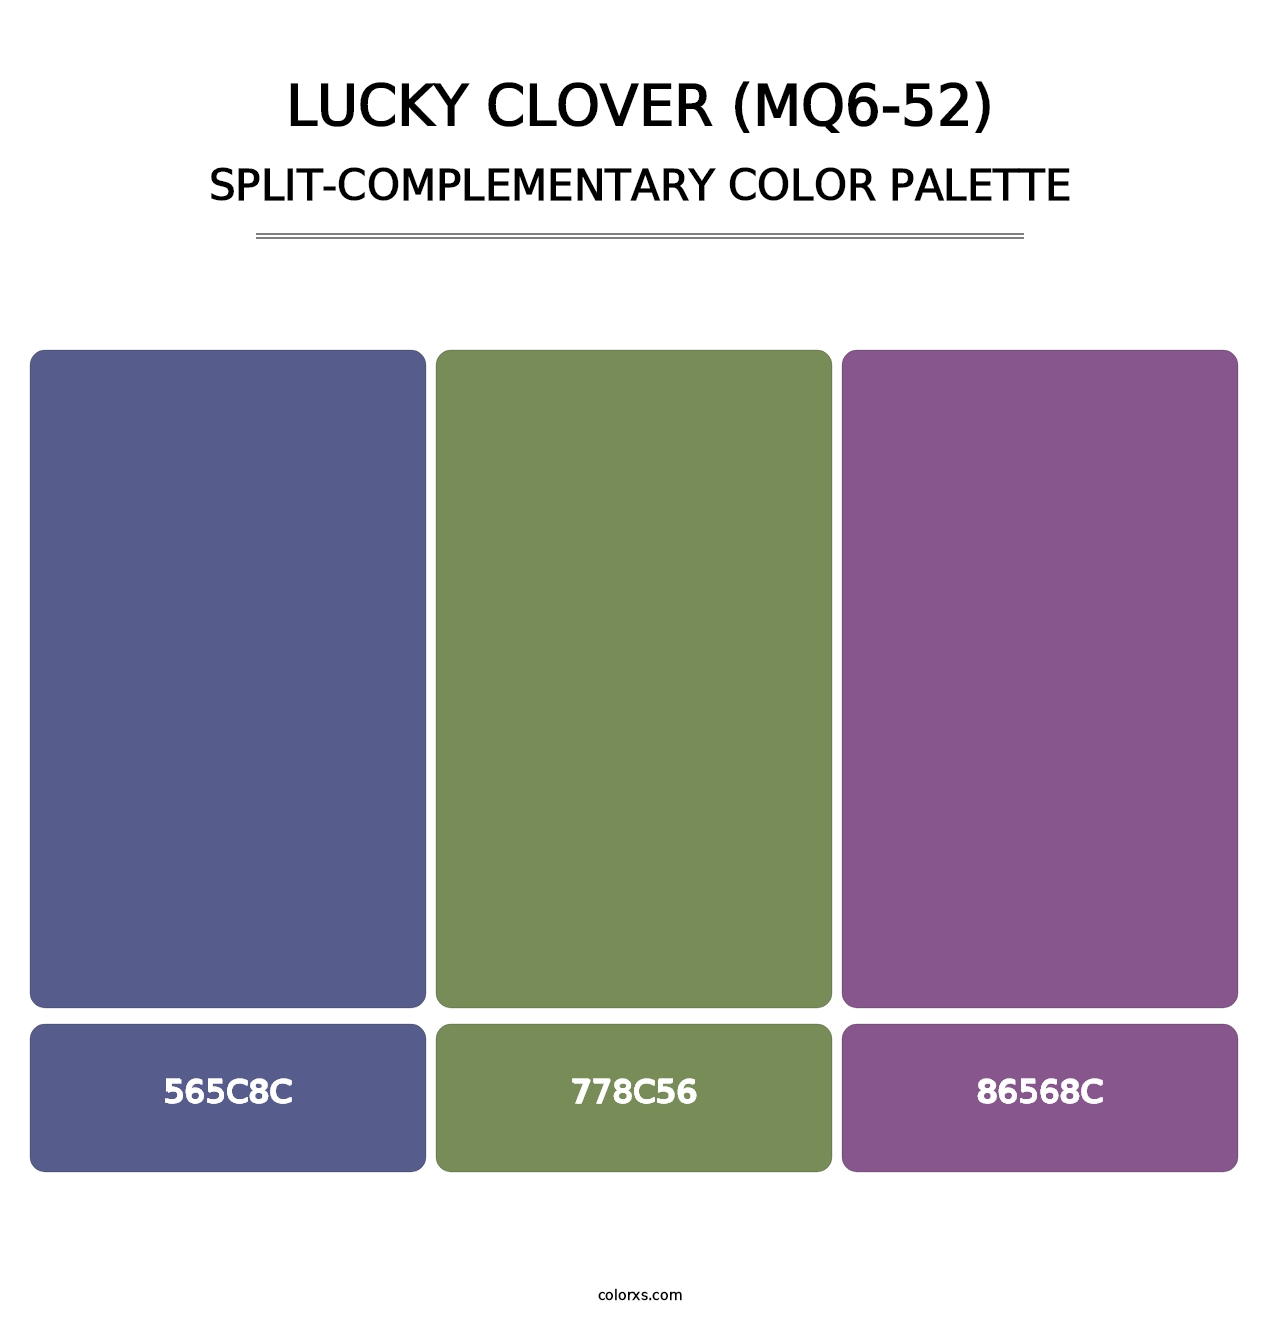 Lucky Clover (MQ6-52) - Split-Complementary Color Palette